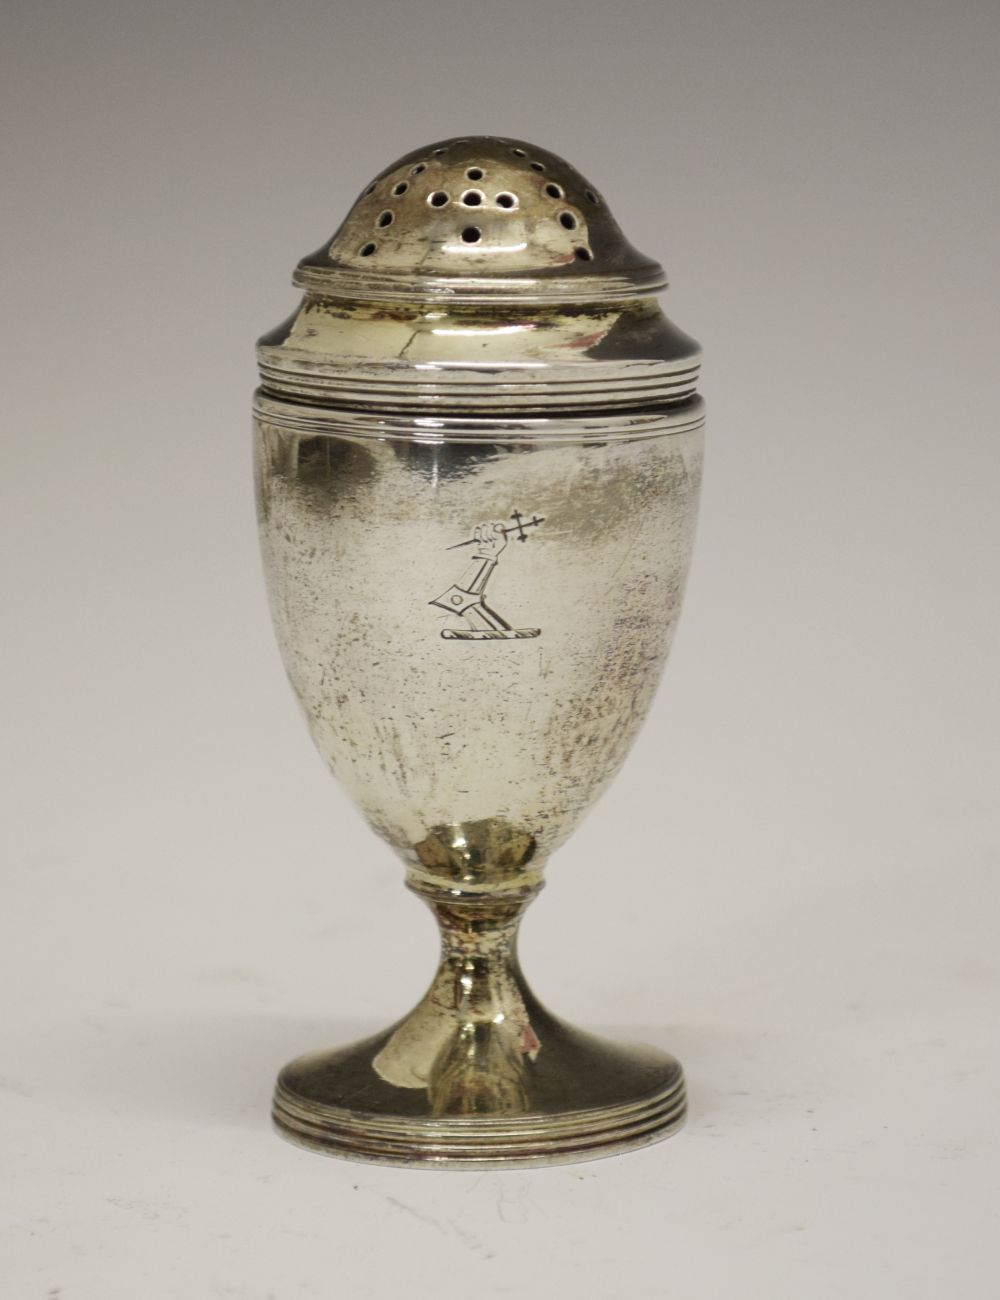 George III silver pepperette, of neoclassical urn form, with engraved armorial, London 1797, sponsor